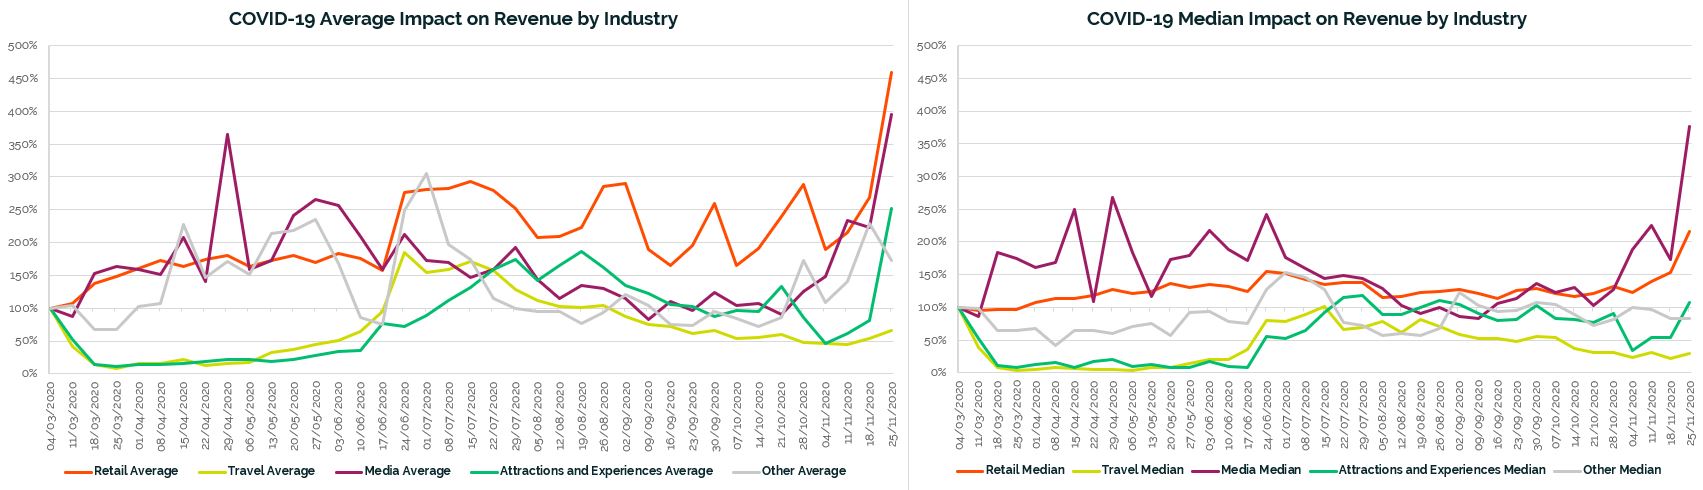 COVID-19 Average Impact on Revenue by Industry 